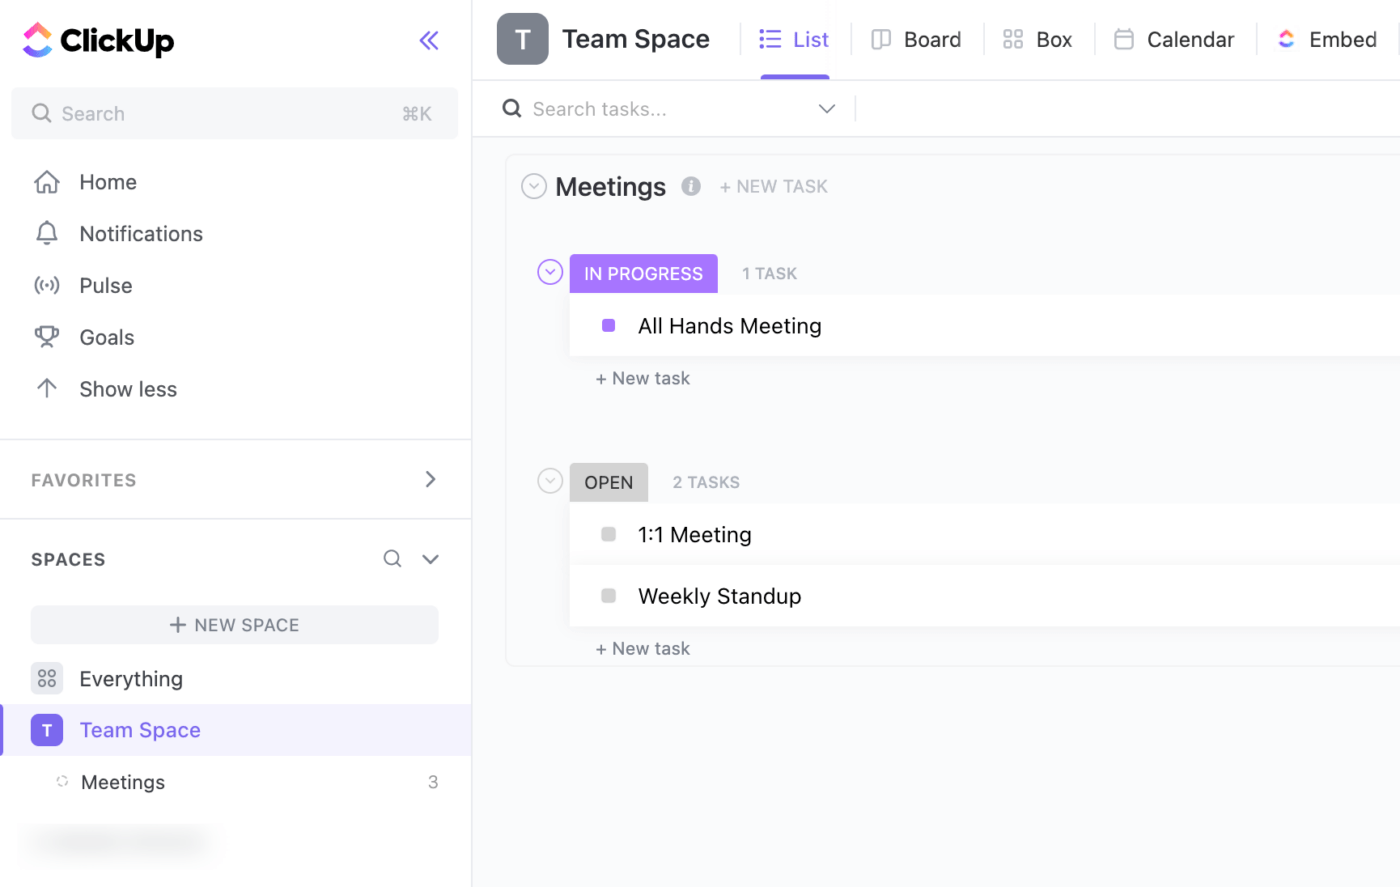 How to manage a software development team remotely: monitoring tasks in ClickUp's List view